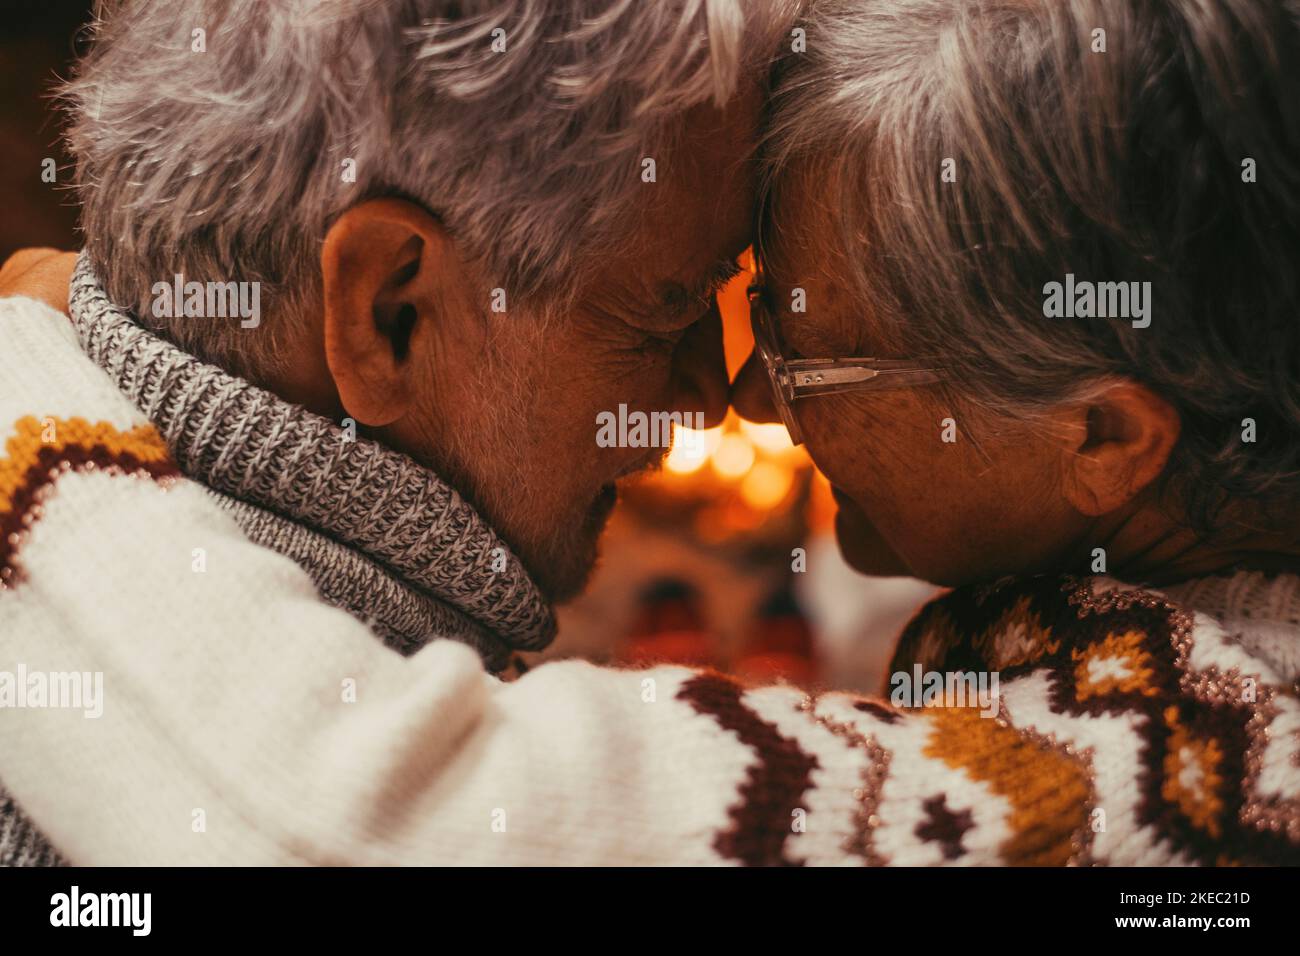 Old caucasian couple spending leisure time together at home. Loving husband and wife touching forehead looking at each other face to face with fireplace in the background during winter holiday Stock Photo